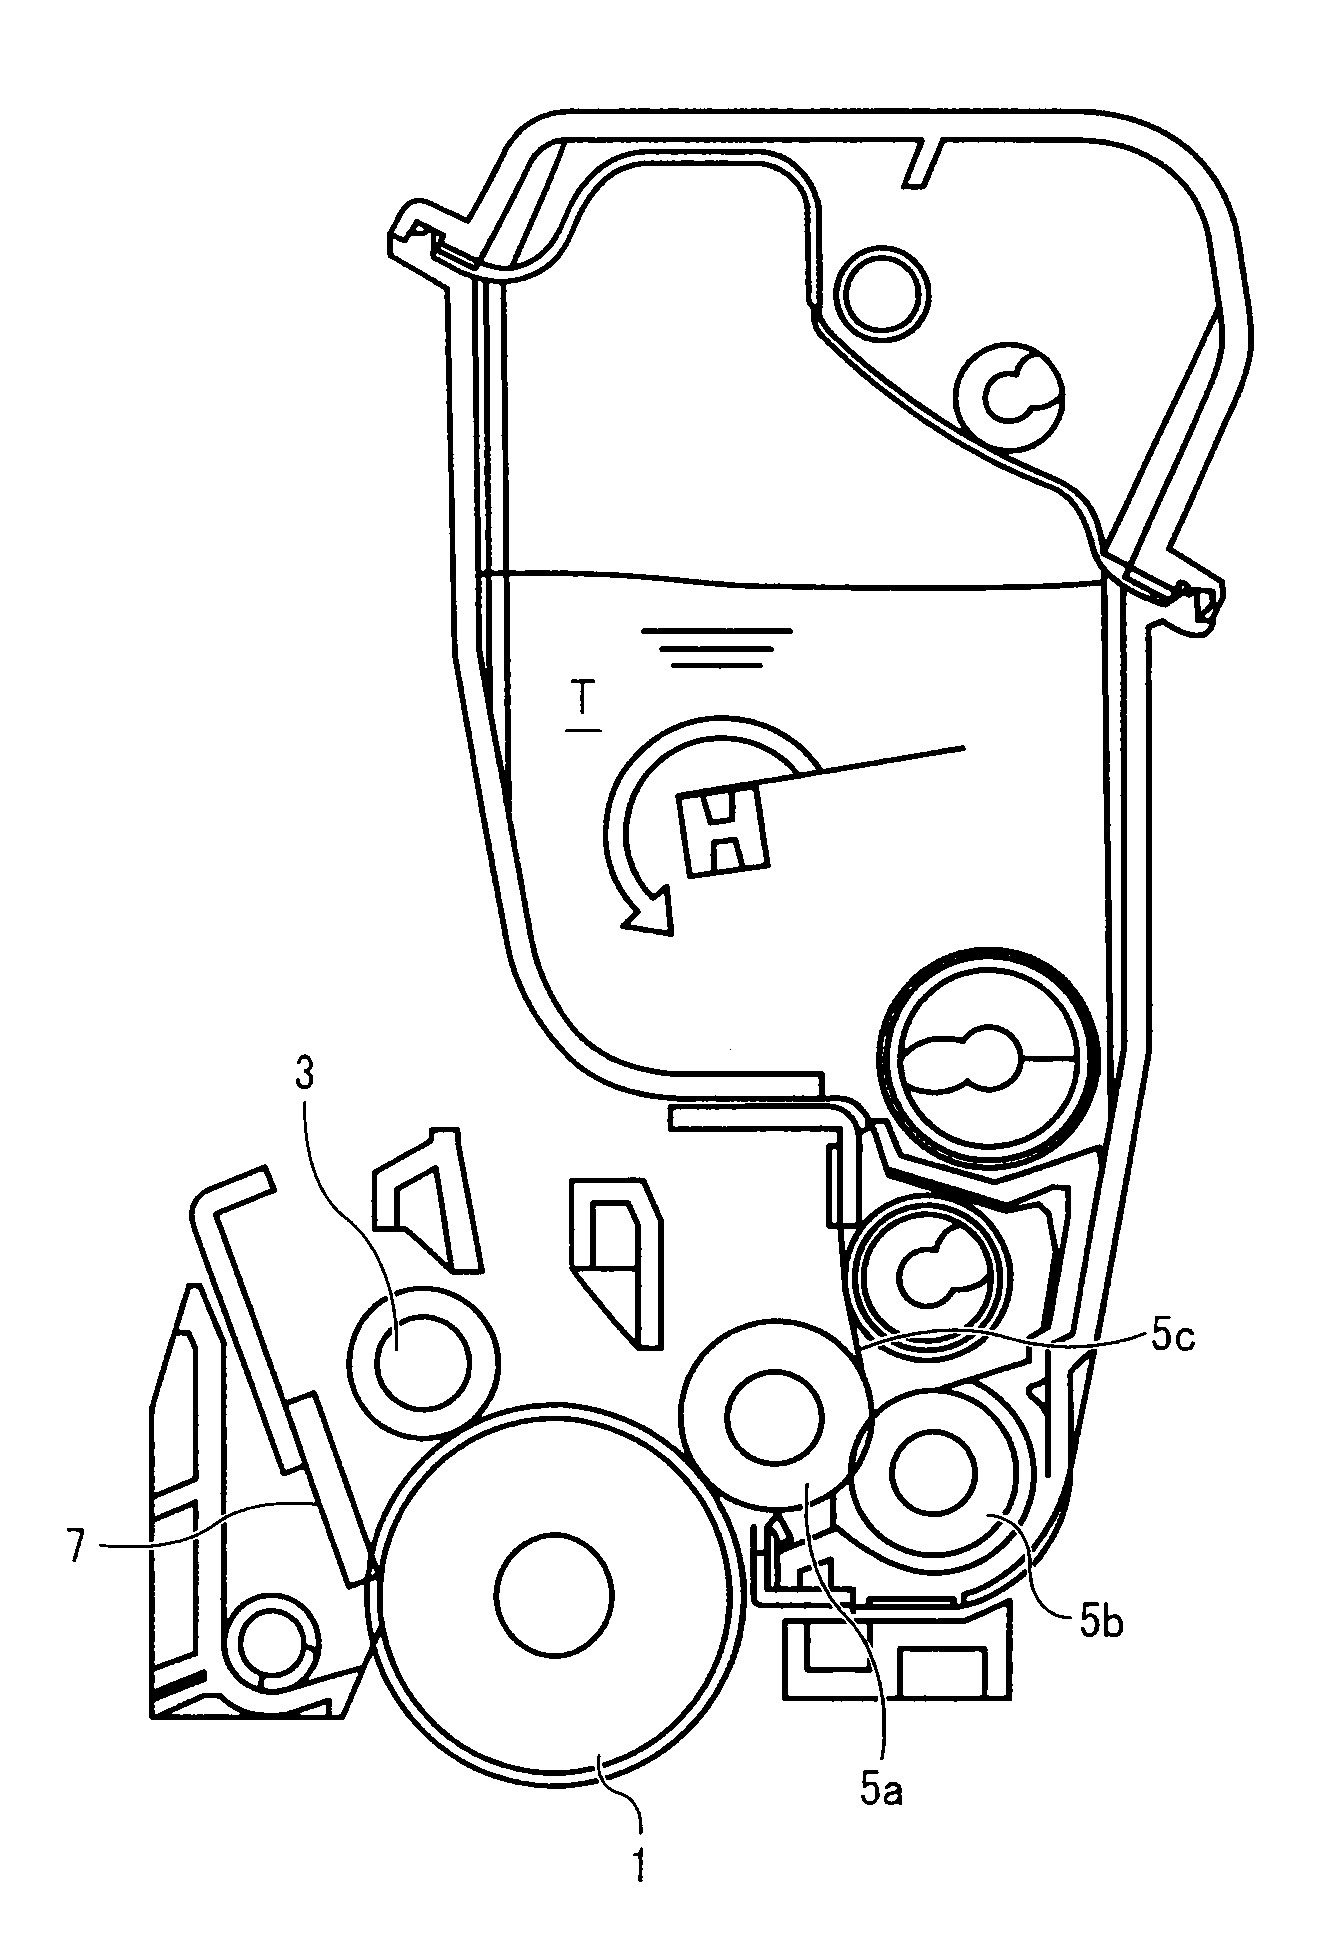 Toner, and process cartridge and image forming apparatus using the same